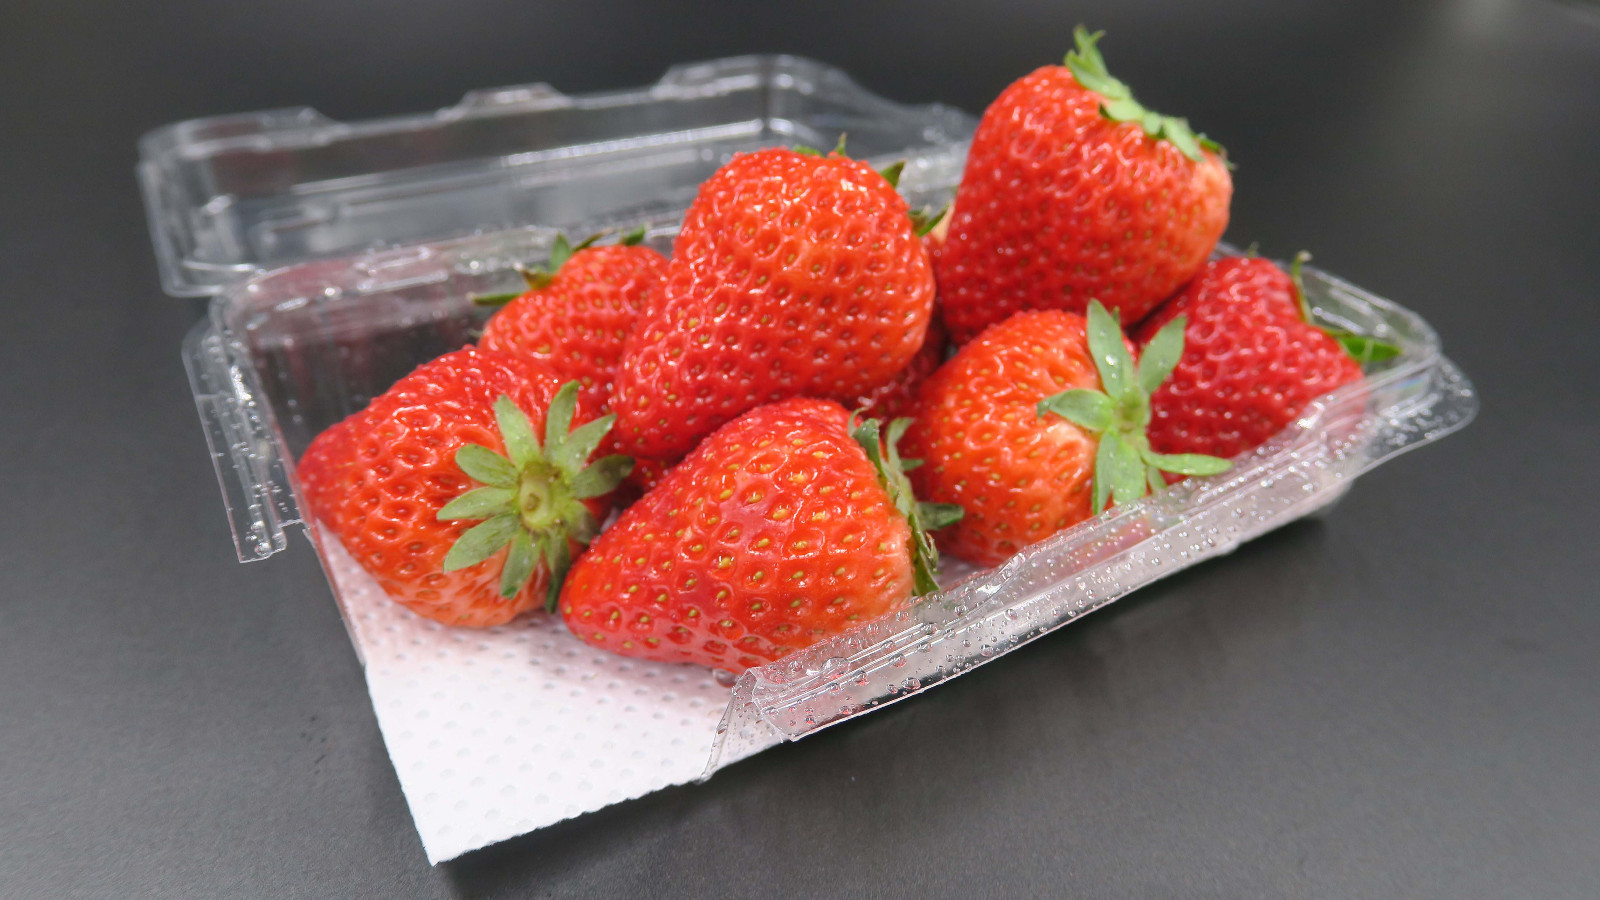 Demi strawberry universal absorbent pads maintaining great product presentation for food-6